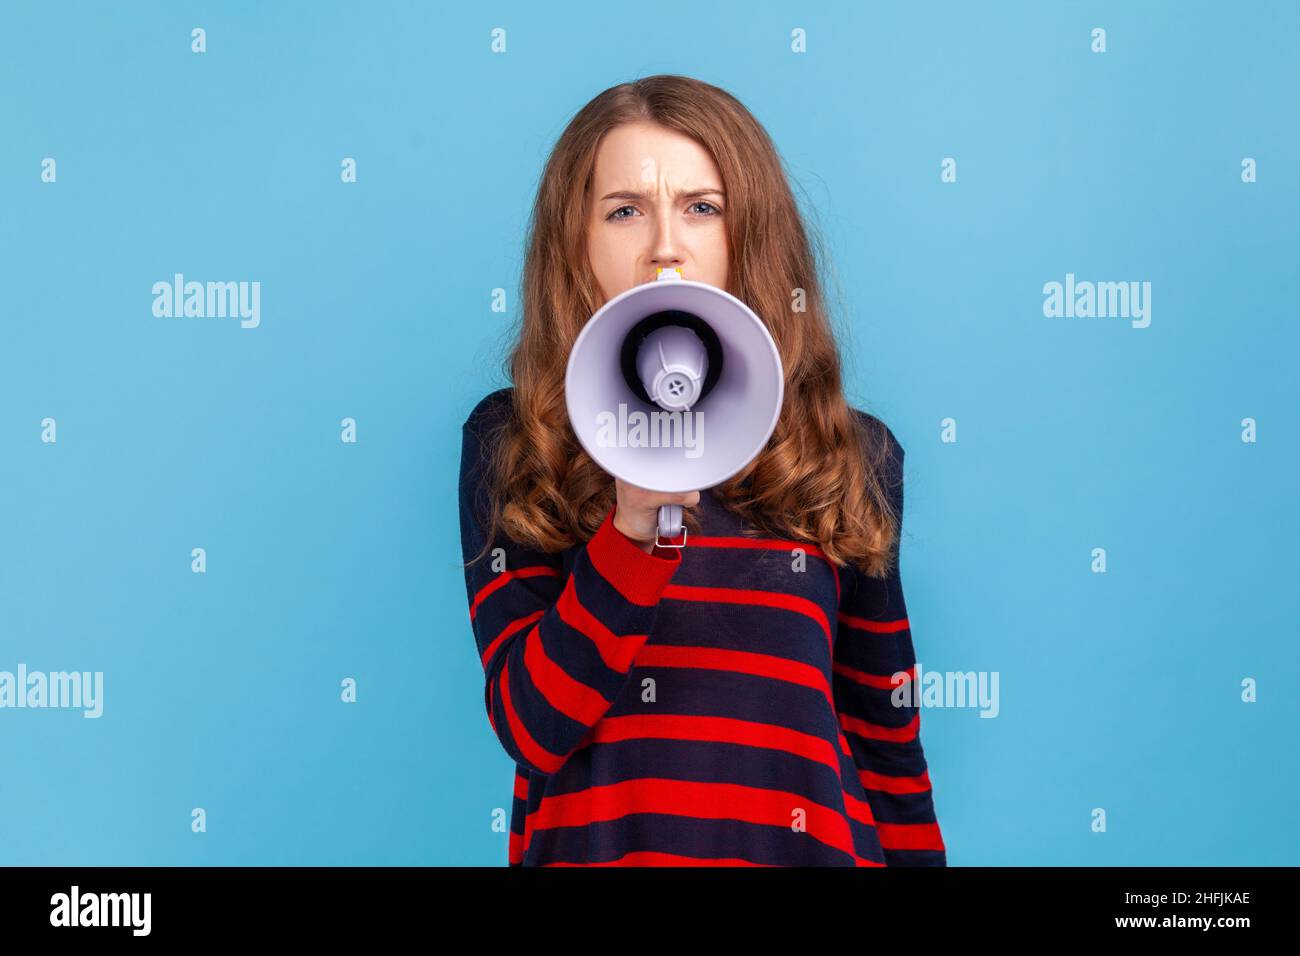 Portrait of woman wearing striped casual style sweater, taking in megaphone, looking at camera with serious expression, important announcement. Indoor studio shot isolated on blue background. Stock Photo